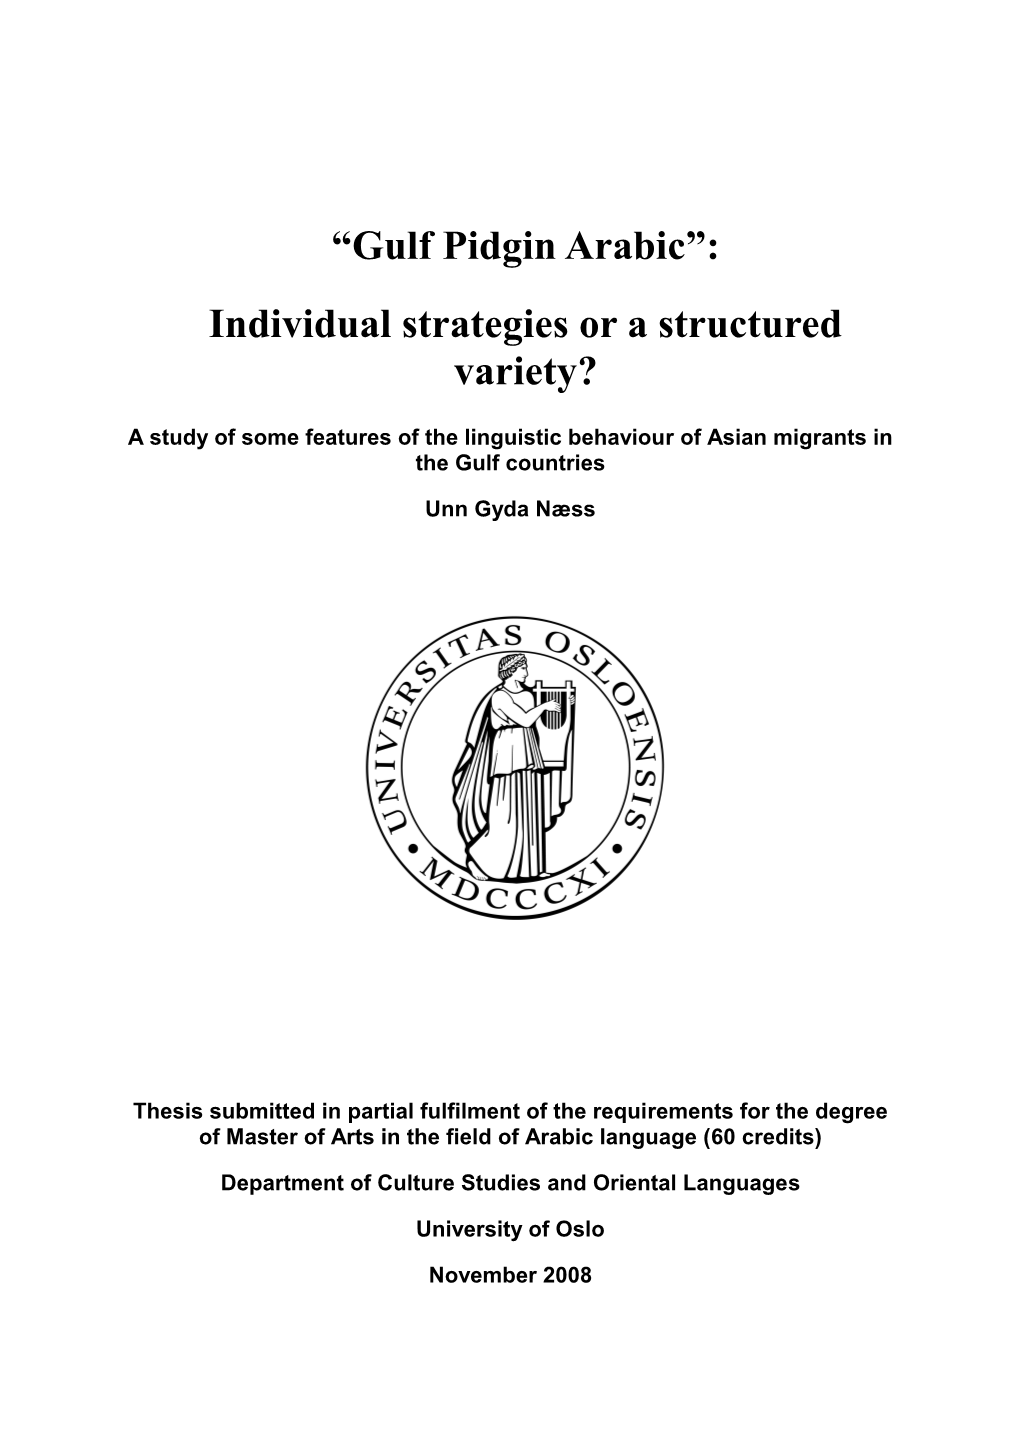 Gulf Pidgin Arabic”: Individual Strategies Or a Structured Variety?